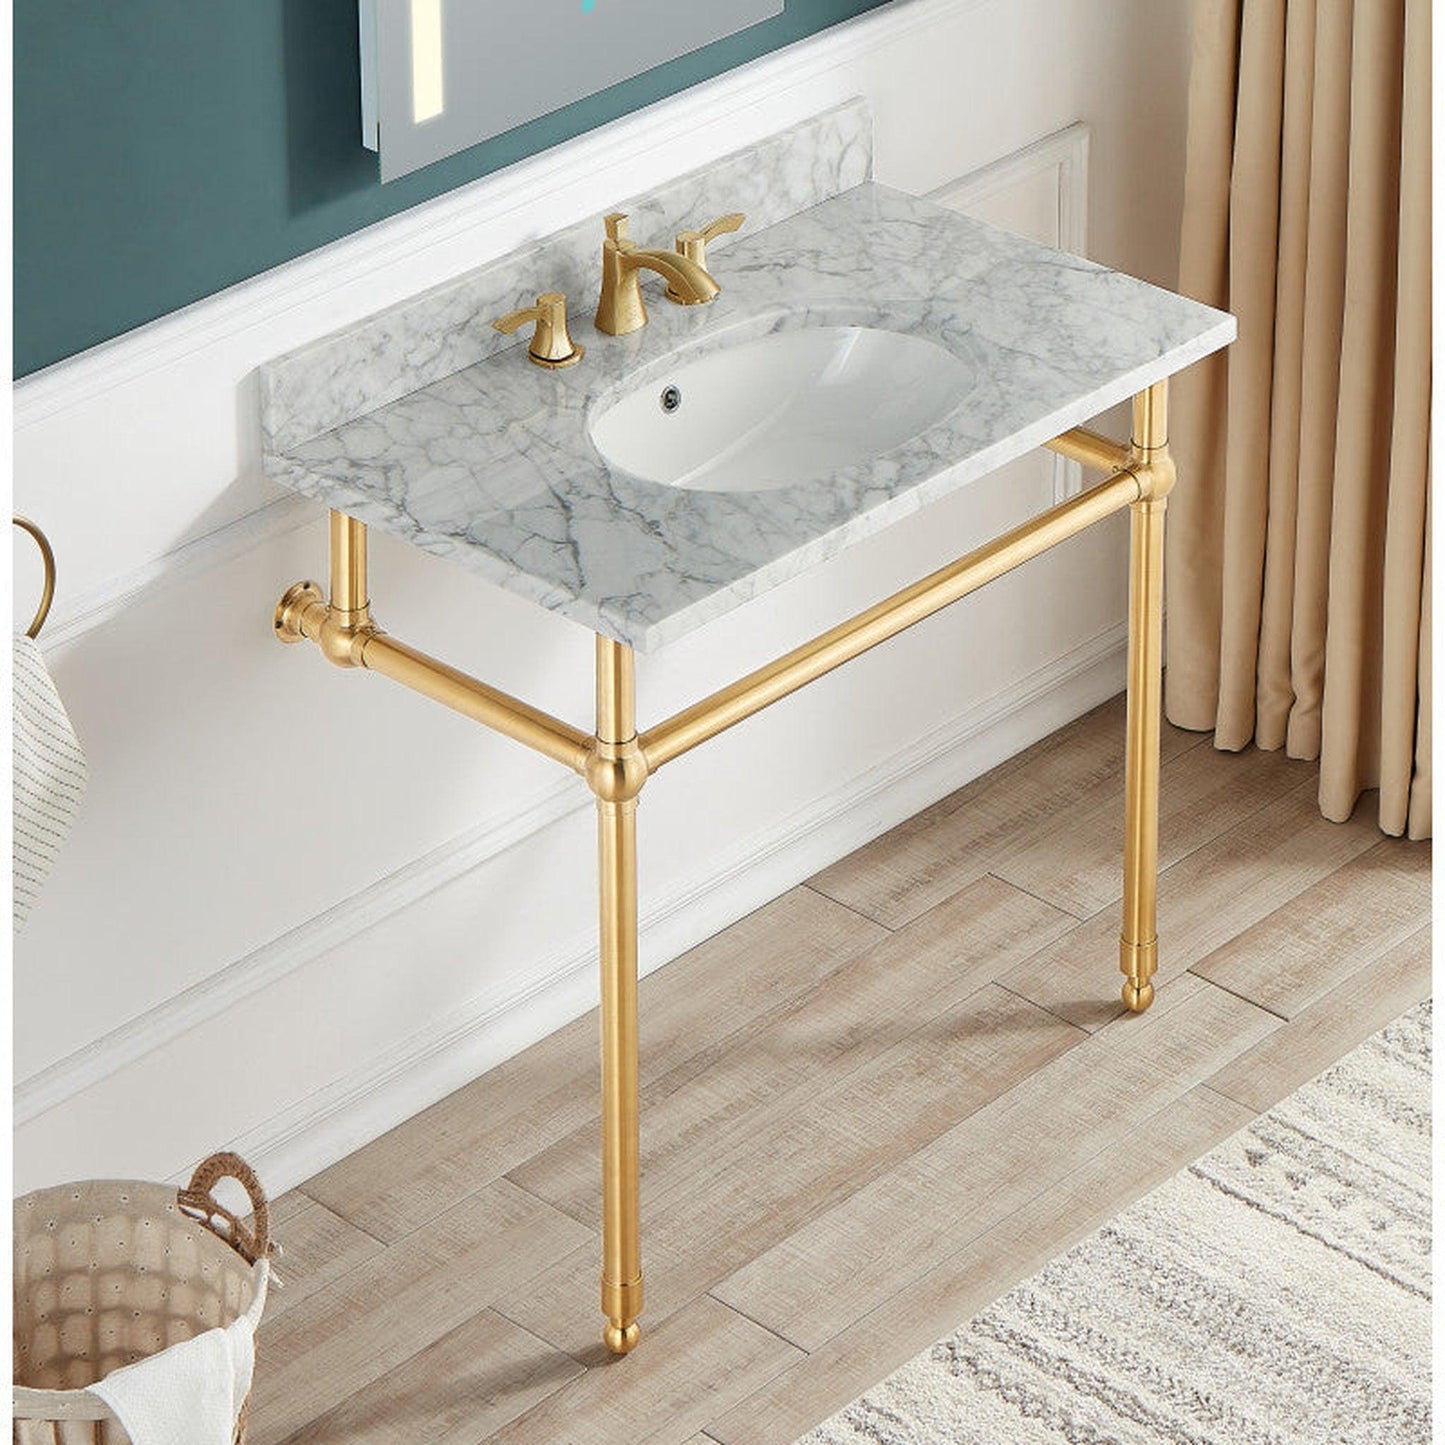 ANZZI Verona Series 34.5" x 34" Console Sink in White Carrara Countertop With Brushed Gold Stainless Steel Stand Legs